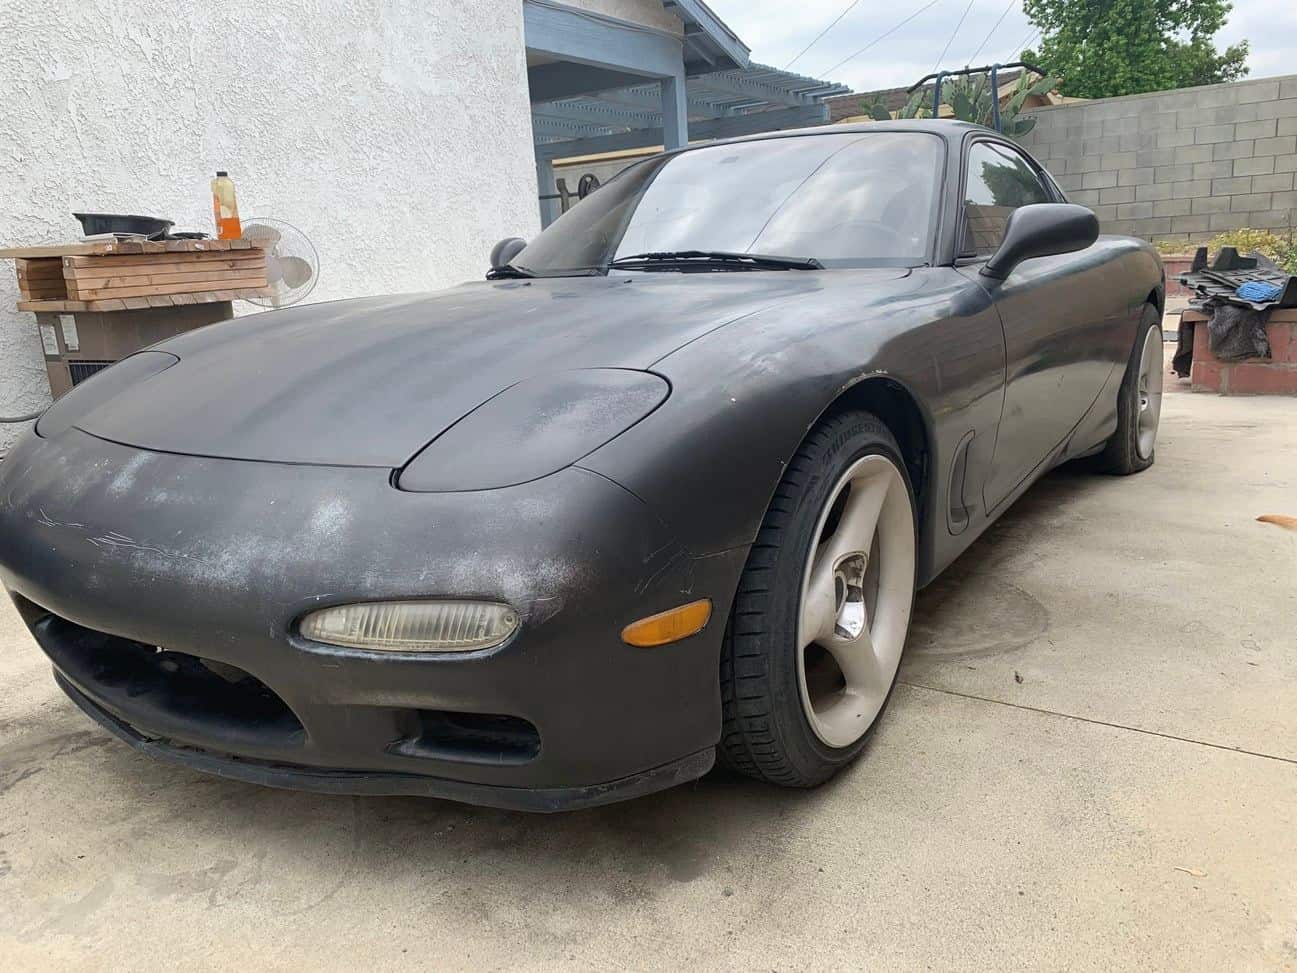 1993 Mazda RX-7 - For Sale 1993 Mazda RX-7 Touring, Clean Title, needs rebuild - Used - VIN JM1FD3311P0202232 - Other - 2WD - Manual - Coupe - Black - Ontario, CA 91764, United States